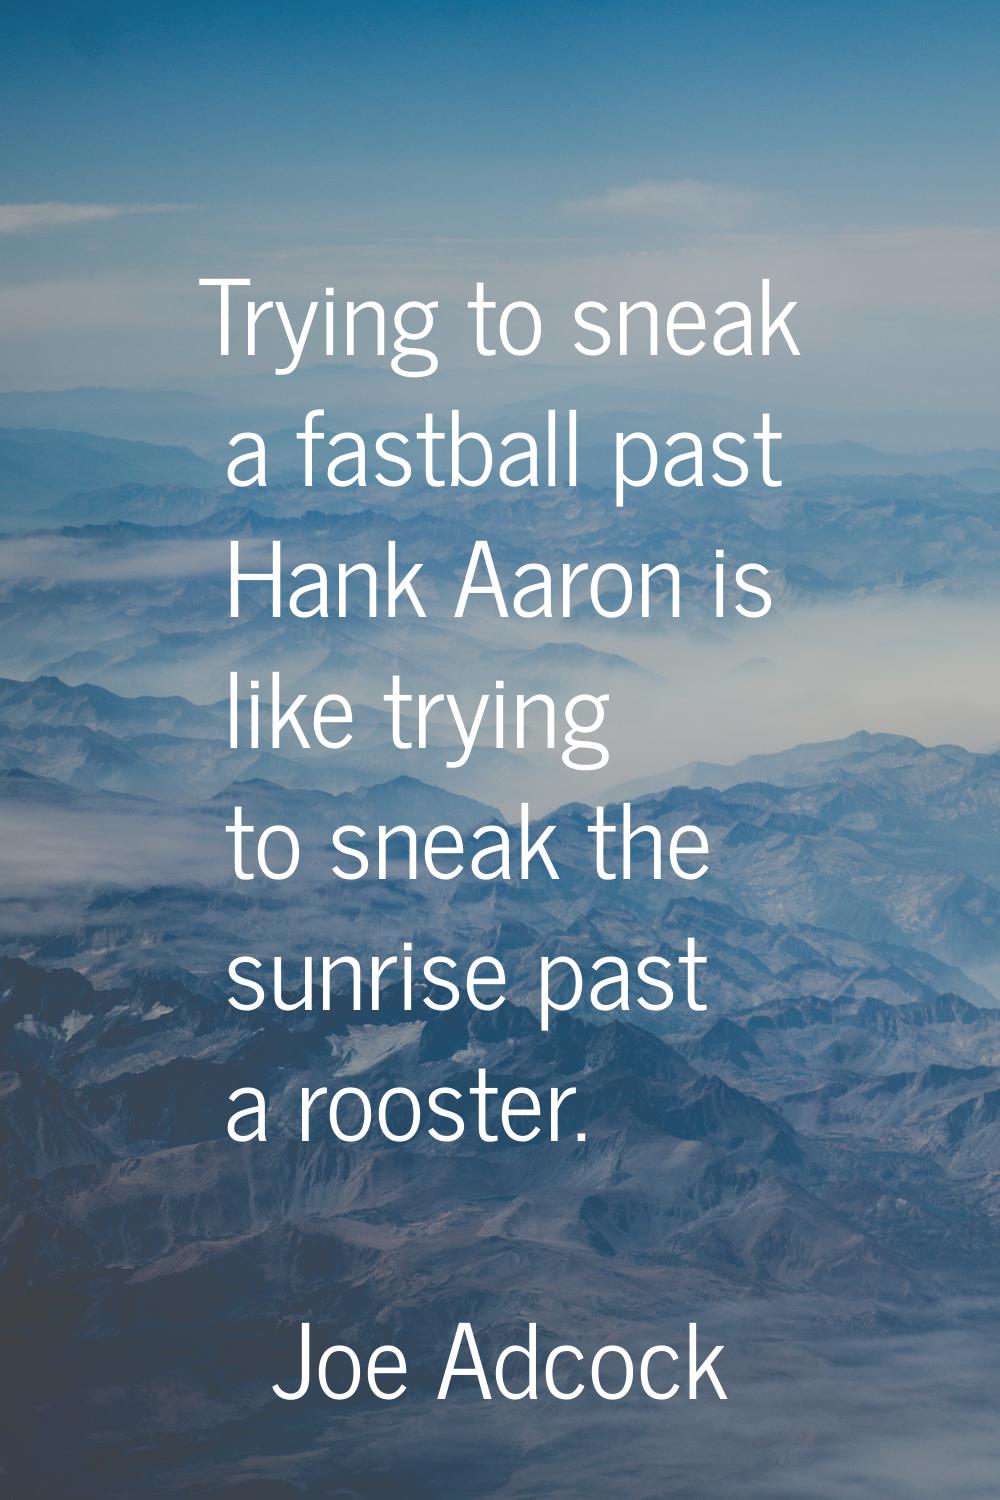 Trying to sneak a fastball past Hank Aaron is like trying to sneak the sunrise past a rooster.